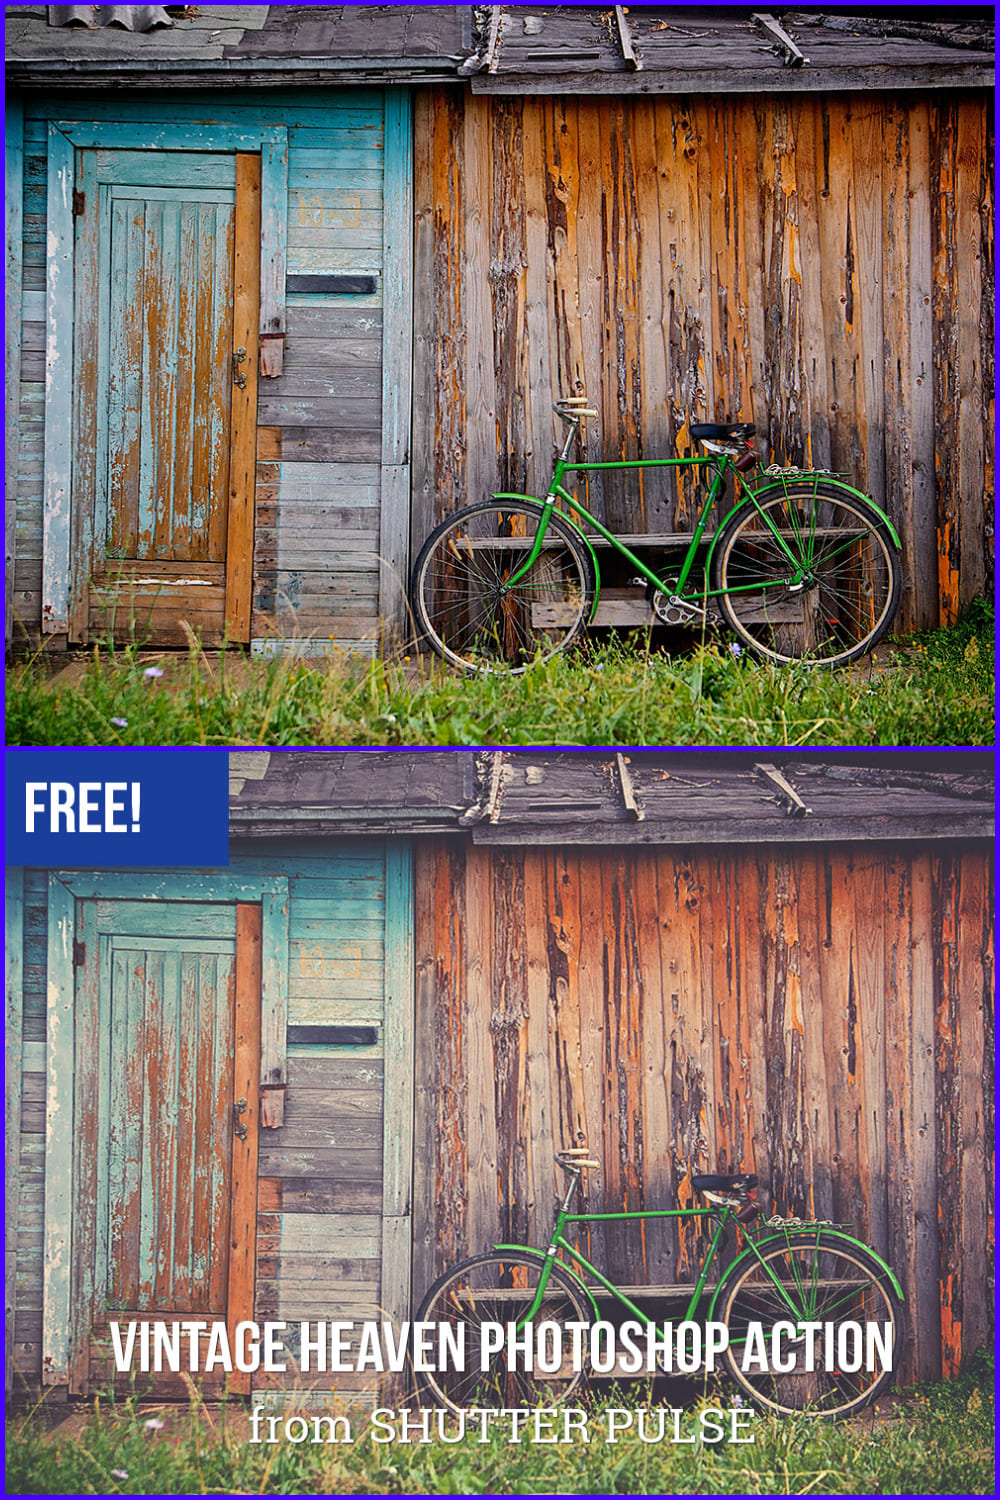 Collage of photos of a bicycle on the background of an old wooden wall in different color shades.